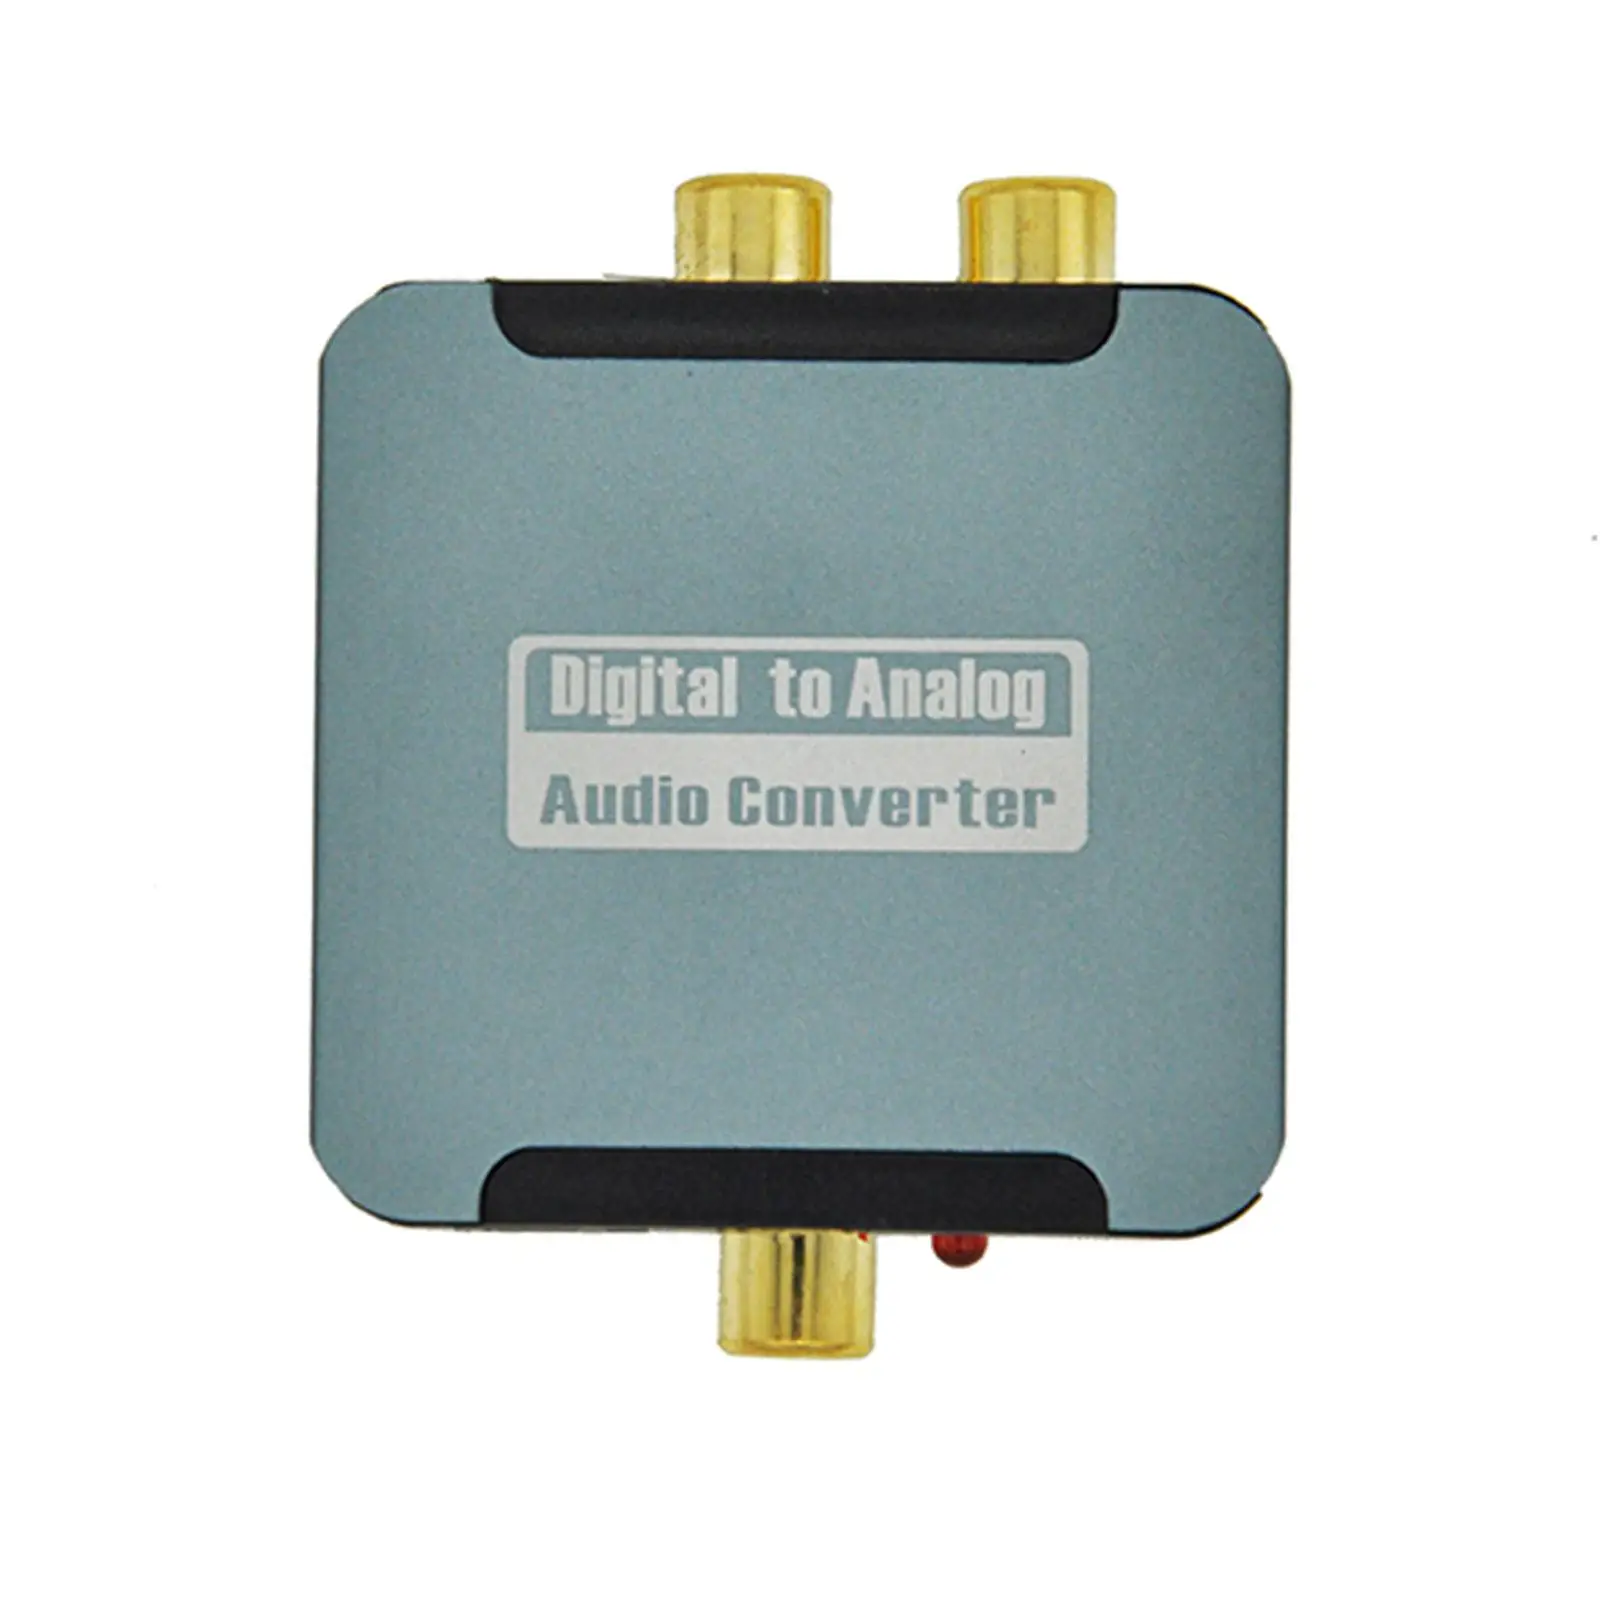 Digital to Analog Audio Converter Clearer Sound Portable Coaxial Optical to 3.5mm Jack 192KHz for DVD Speaker TV Computer